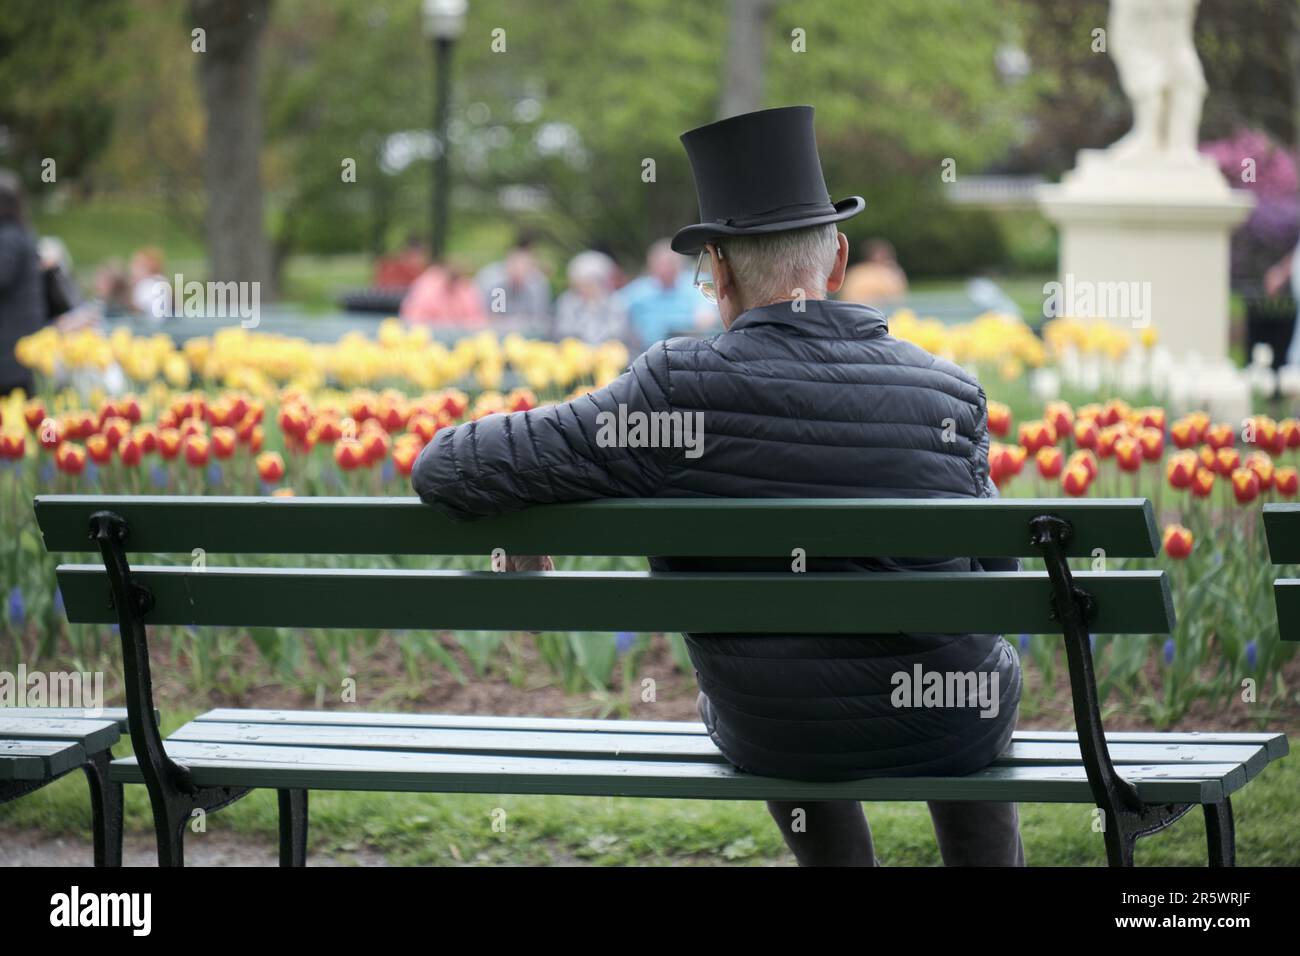 man wearing a top hat sitting on park bench seen from behind Stock Photo